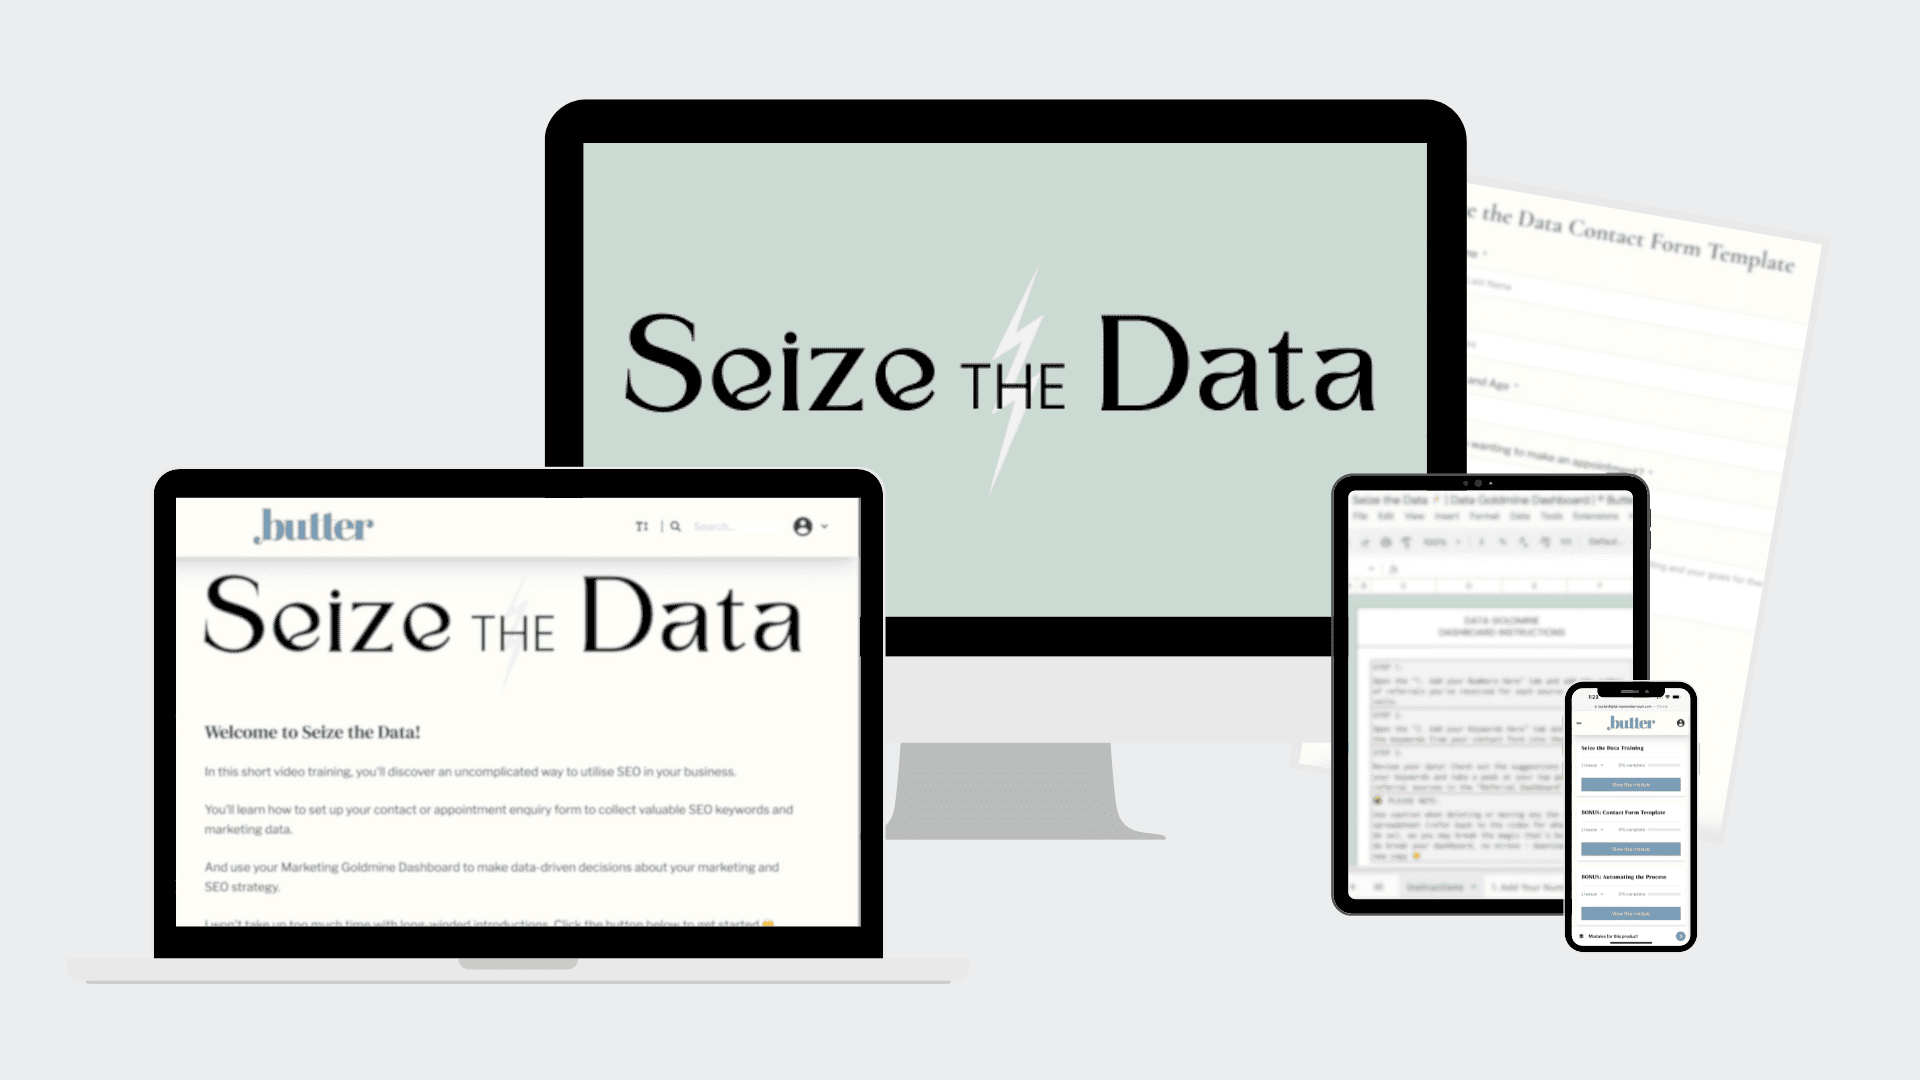 Seize the data mockup showing the course platform, Data Goldmine Dashboard, Contact Form Template and mobile access.